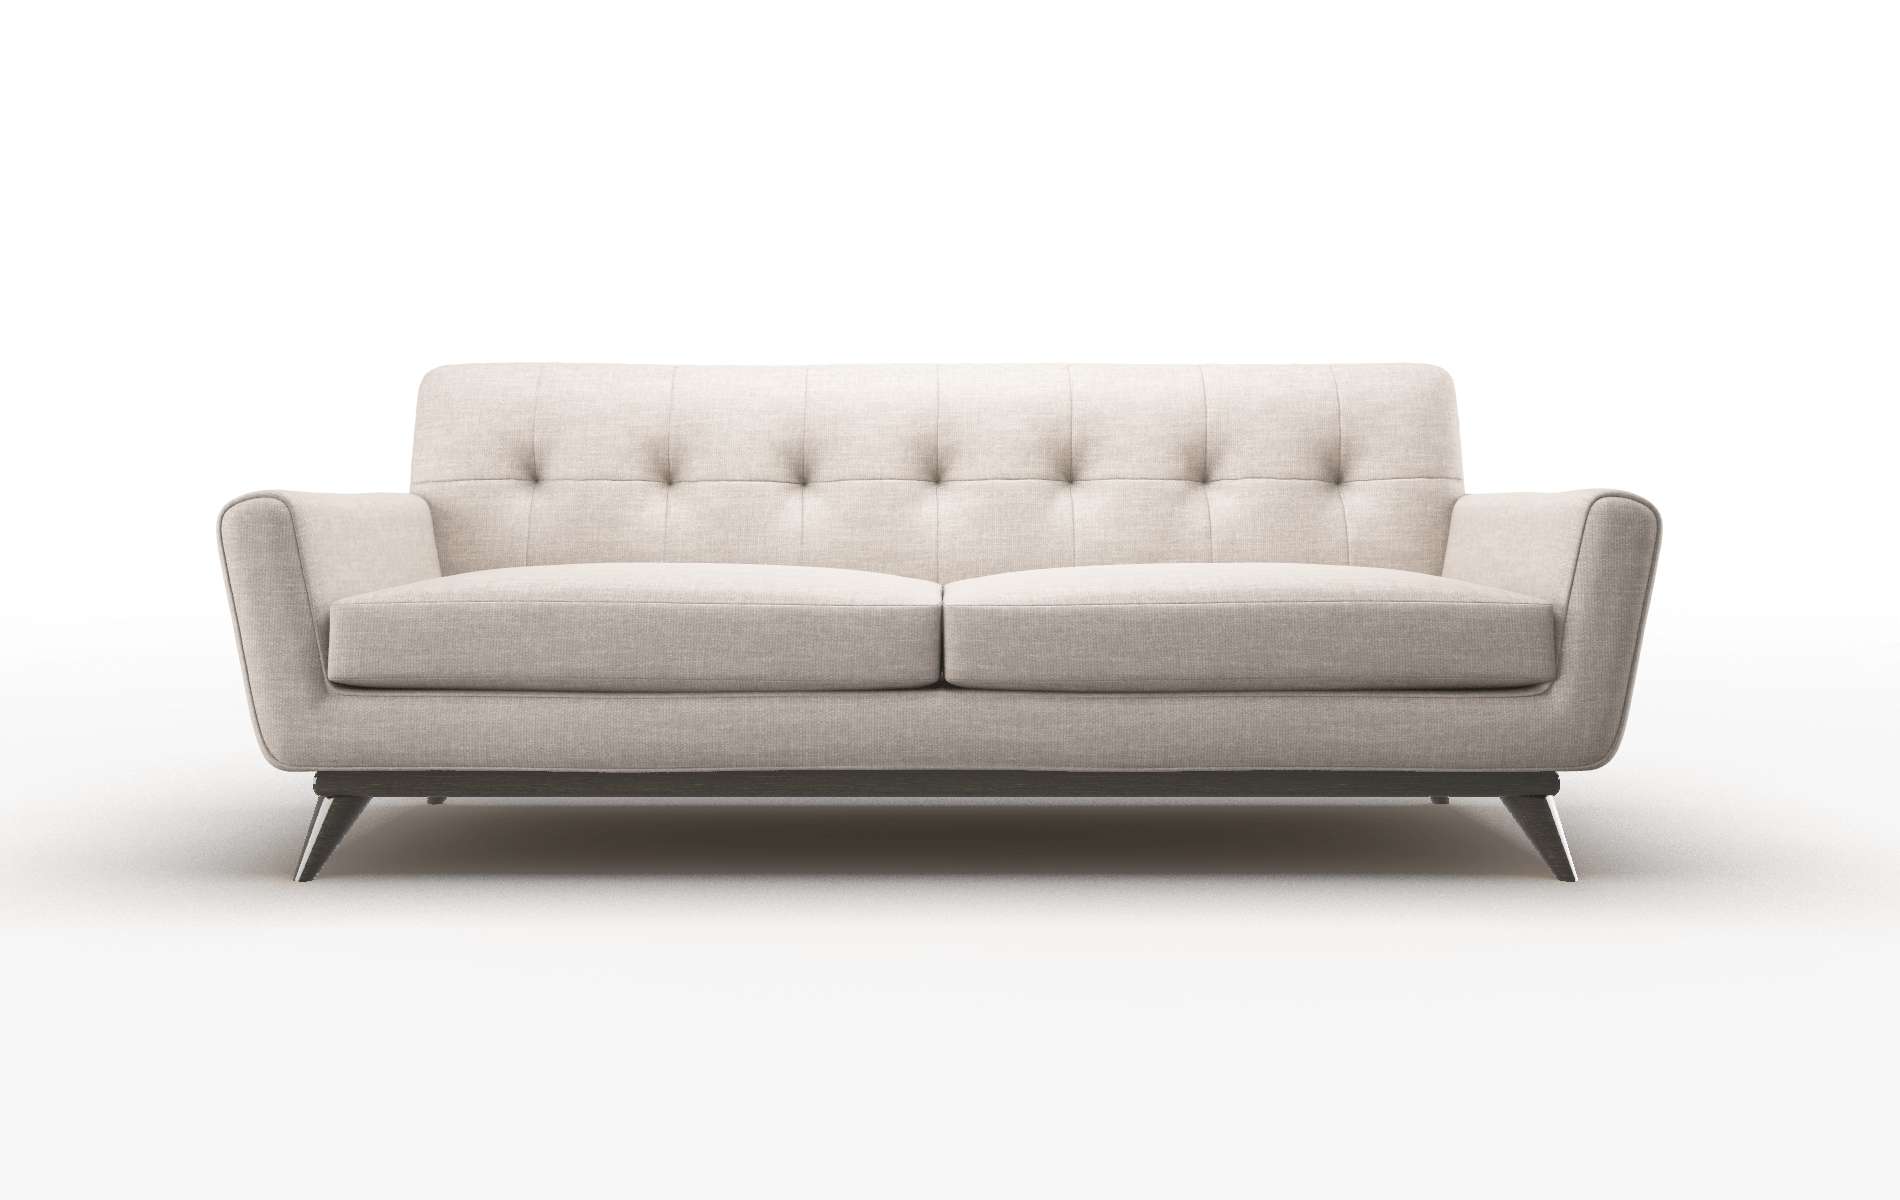 Brussels Clyde Dolphin Sofa espresso legs